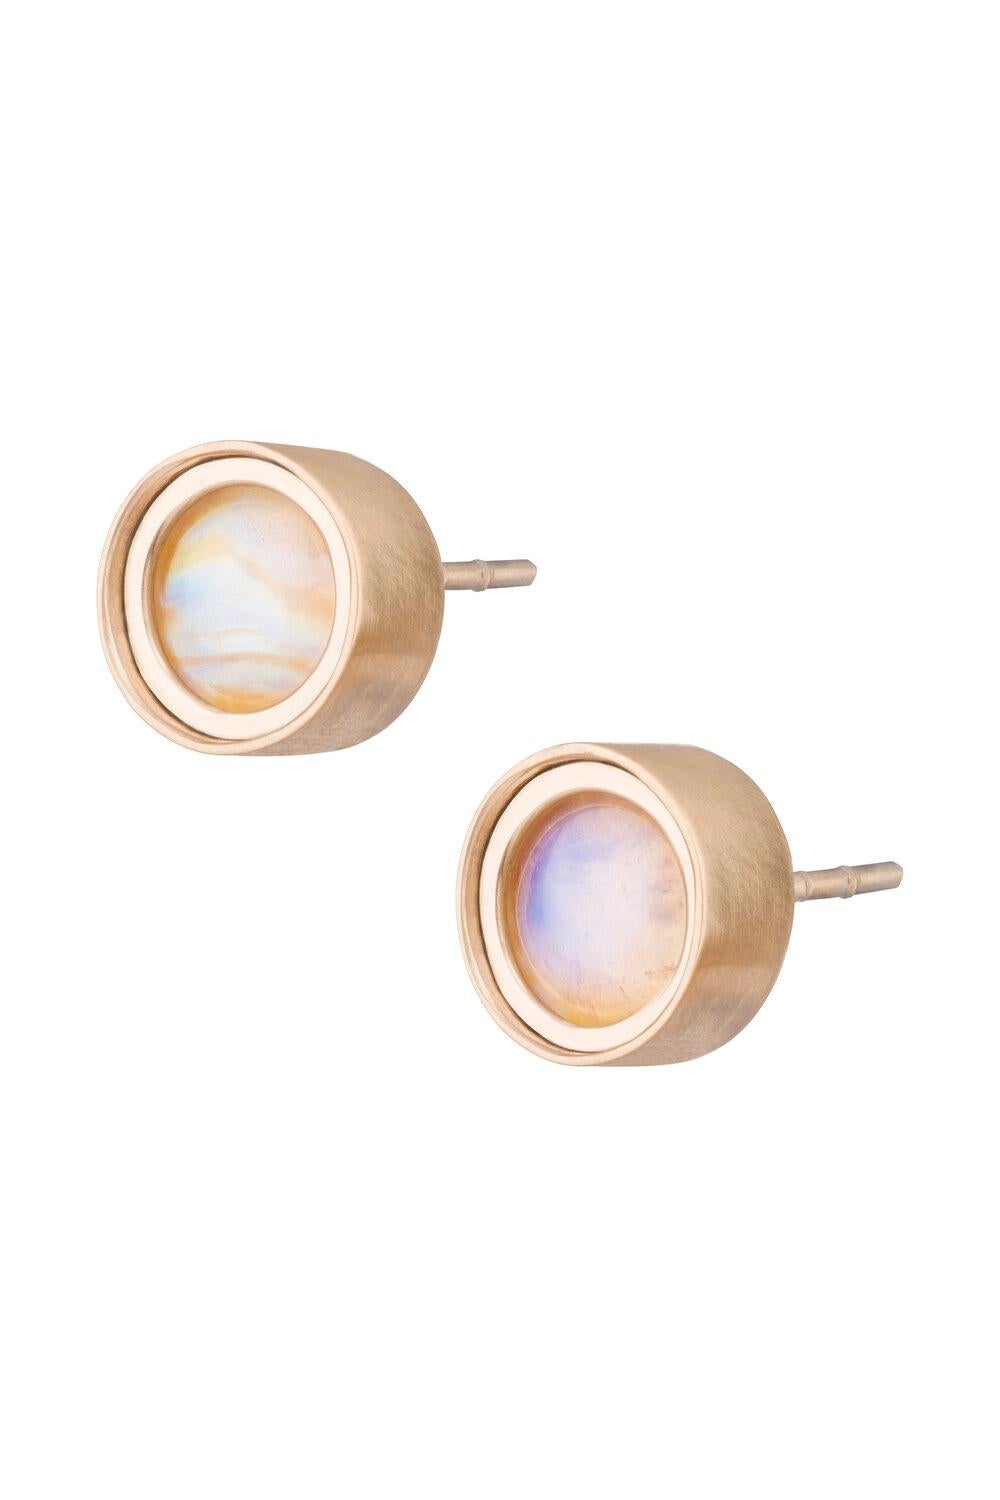 OUROBOROS rainbow moonstone round cabochon studs in a ridged frame of 18kt gold studs. Blue and white rainbow moonstone options.

OUROBOROS’ commitment to using only the most unique stones set in 18 or 24 Karat gold, is matched only to Olivia’s